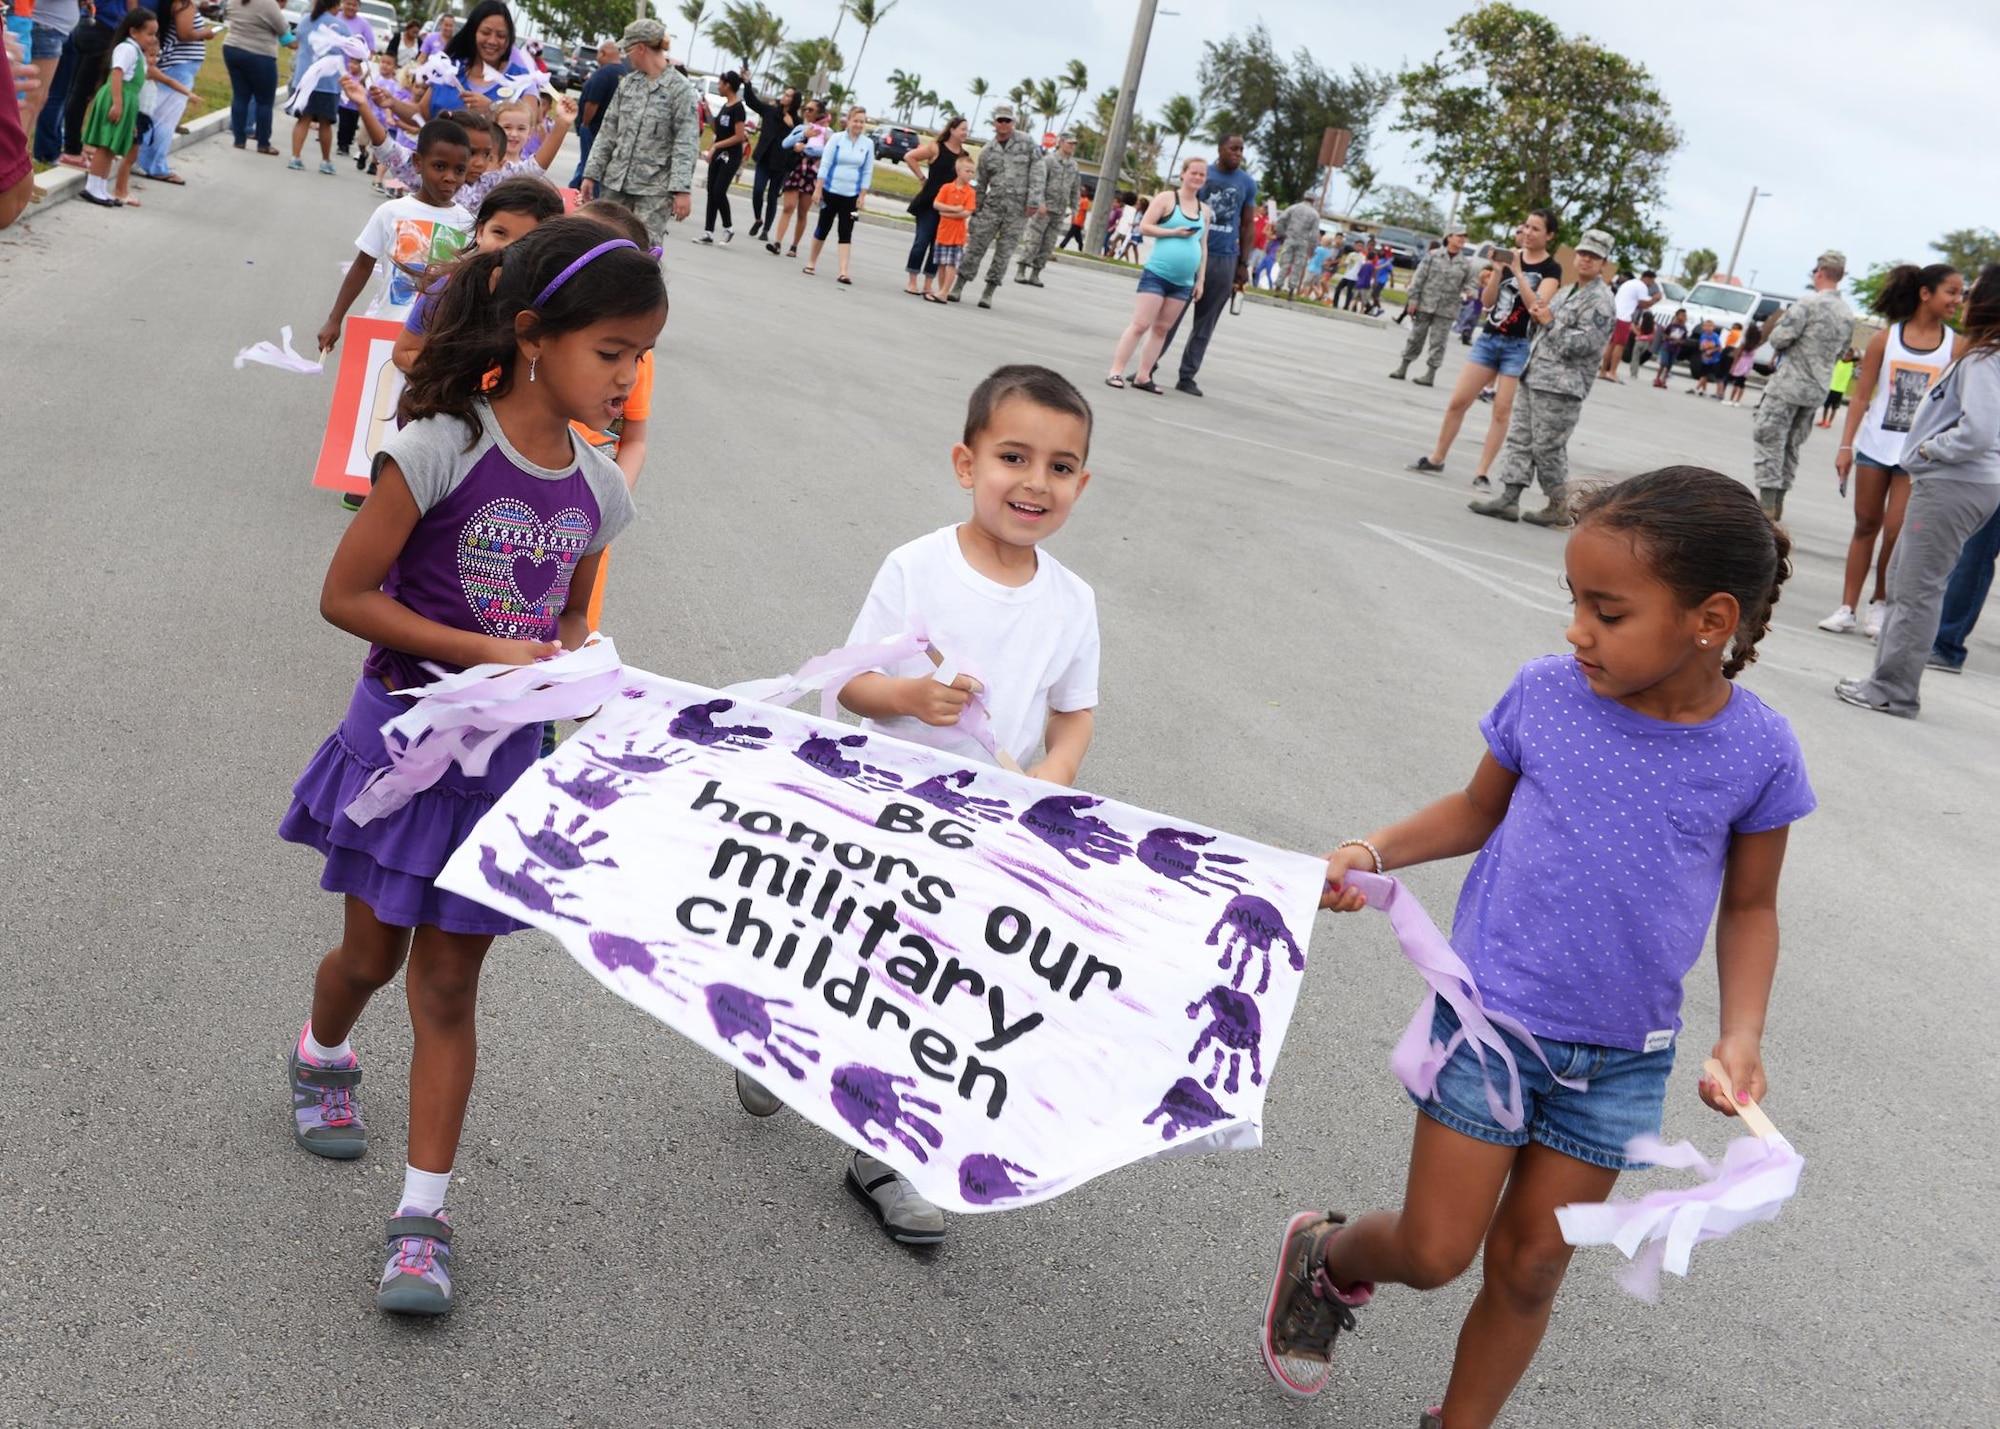 Children walk in a parade to celebrate the Month of the Military Child April 8, 2016, at Andersen Air Force Base, Guam. In 1986, April was designated to recognize the sacrifices and contributions of children of members of the armed forces. (U.S. Air Force photo by Senior Airman Cierra Presentado/Released)